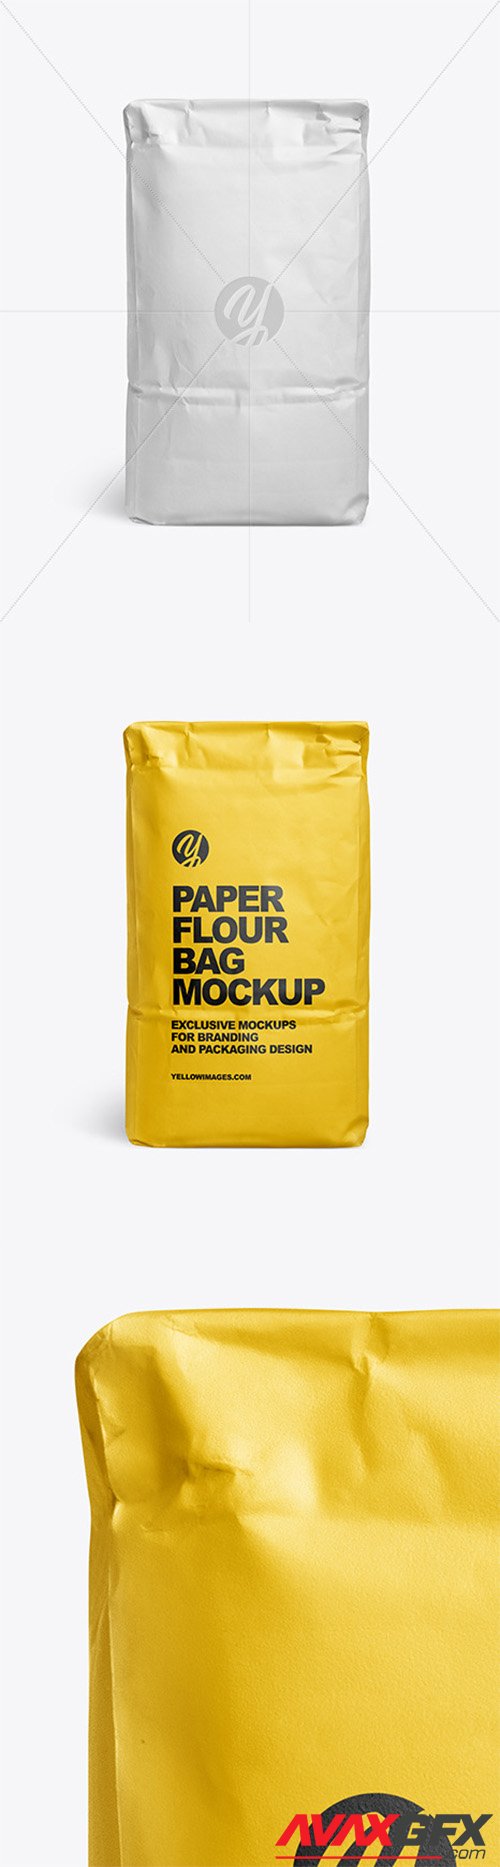 Download Paper Flour Bag Mockup Front View 61238 Avaxgfx All Downloads That You Need In One Place Graphic From Nitroflare Rapidgator PSD Mockup Templates